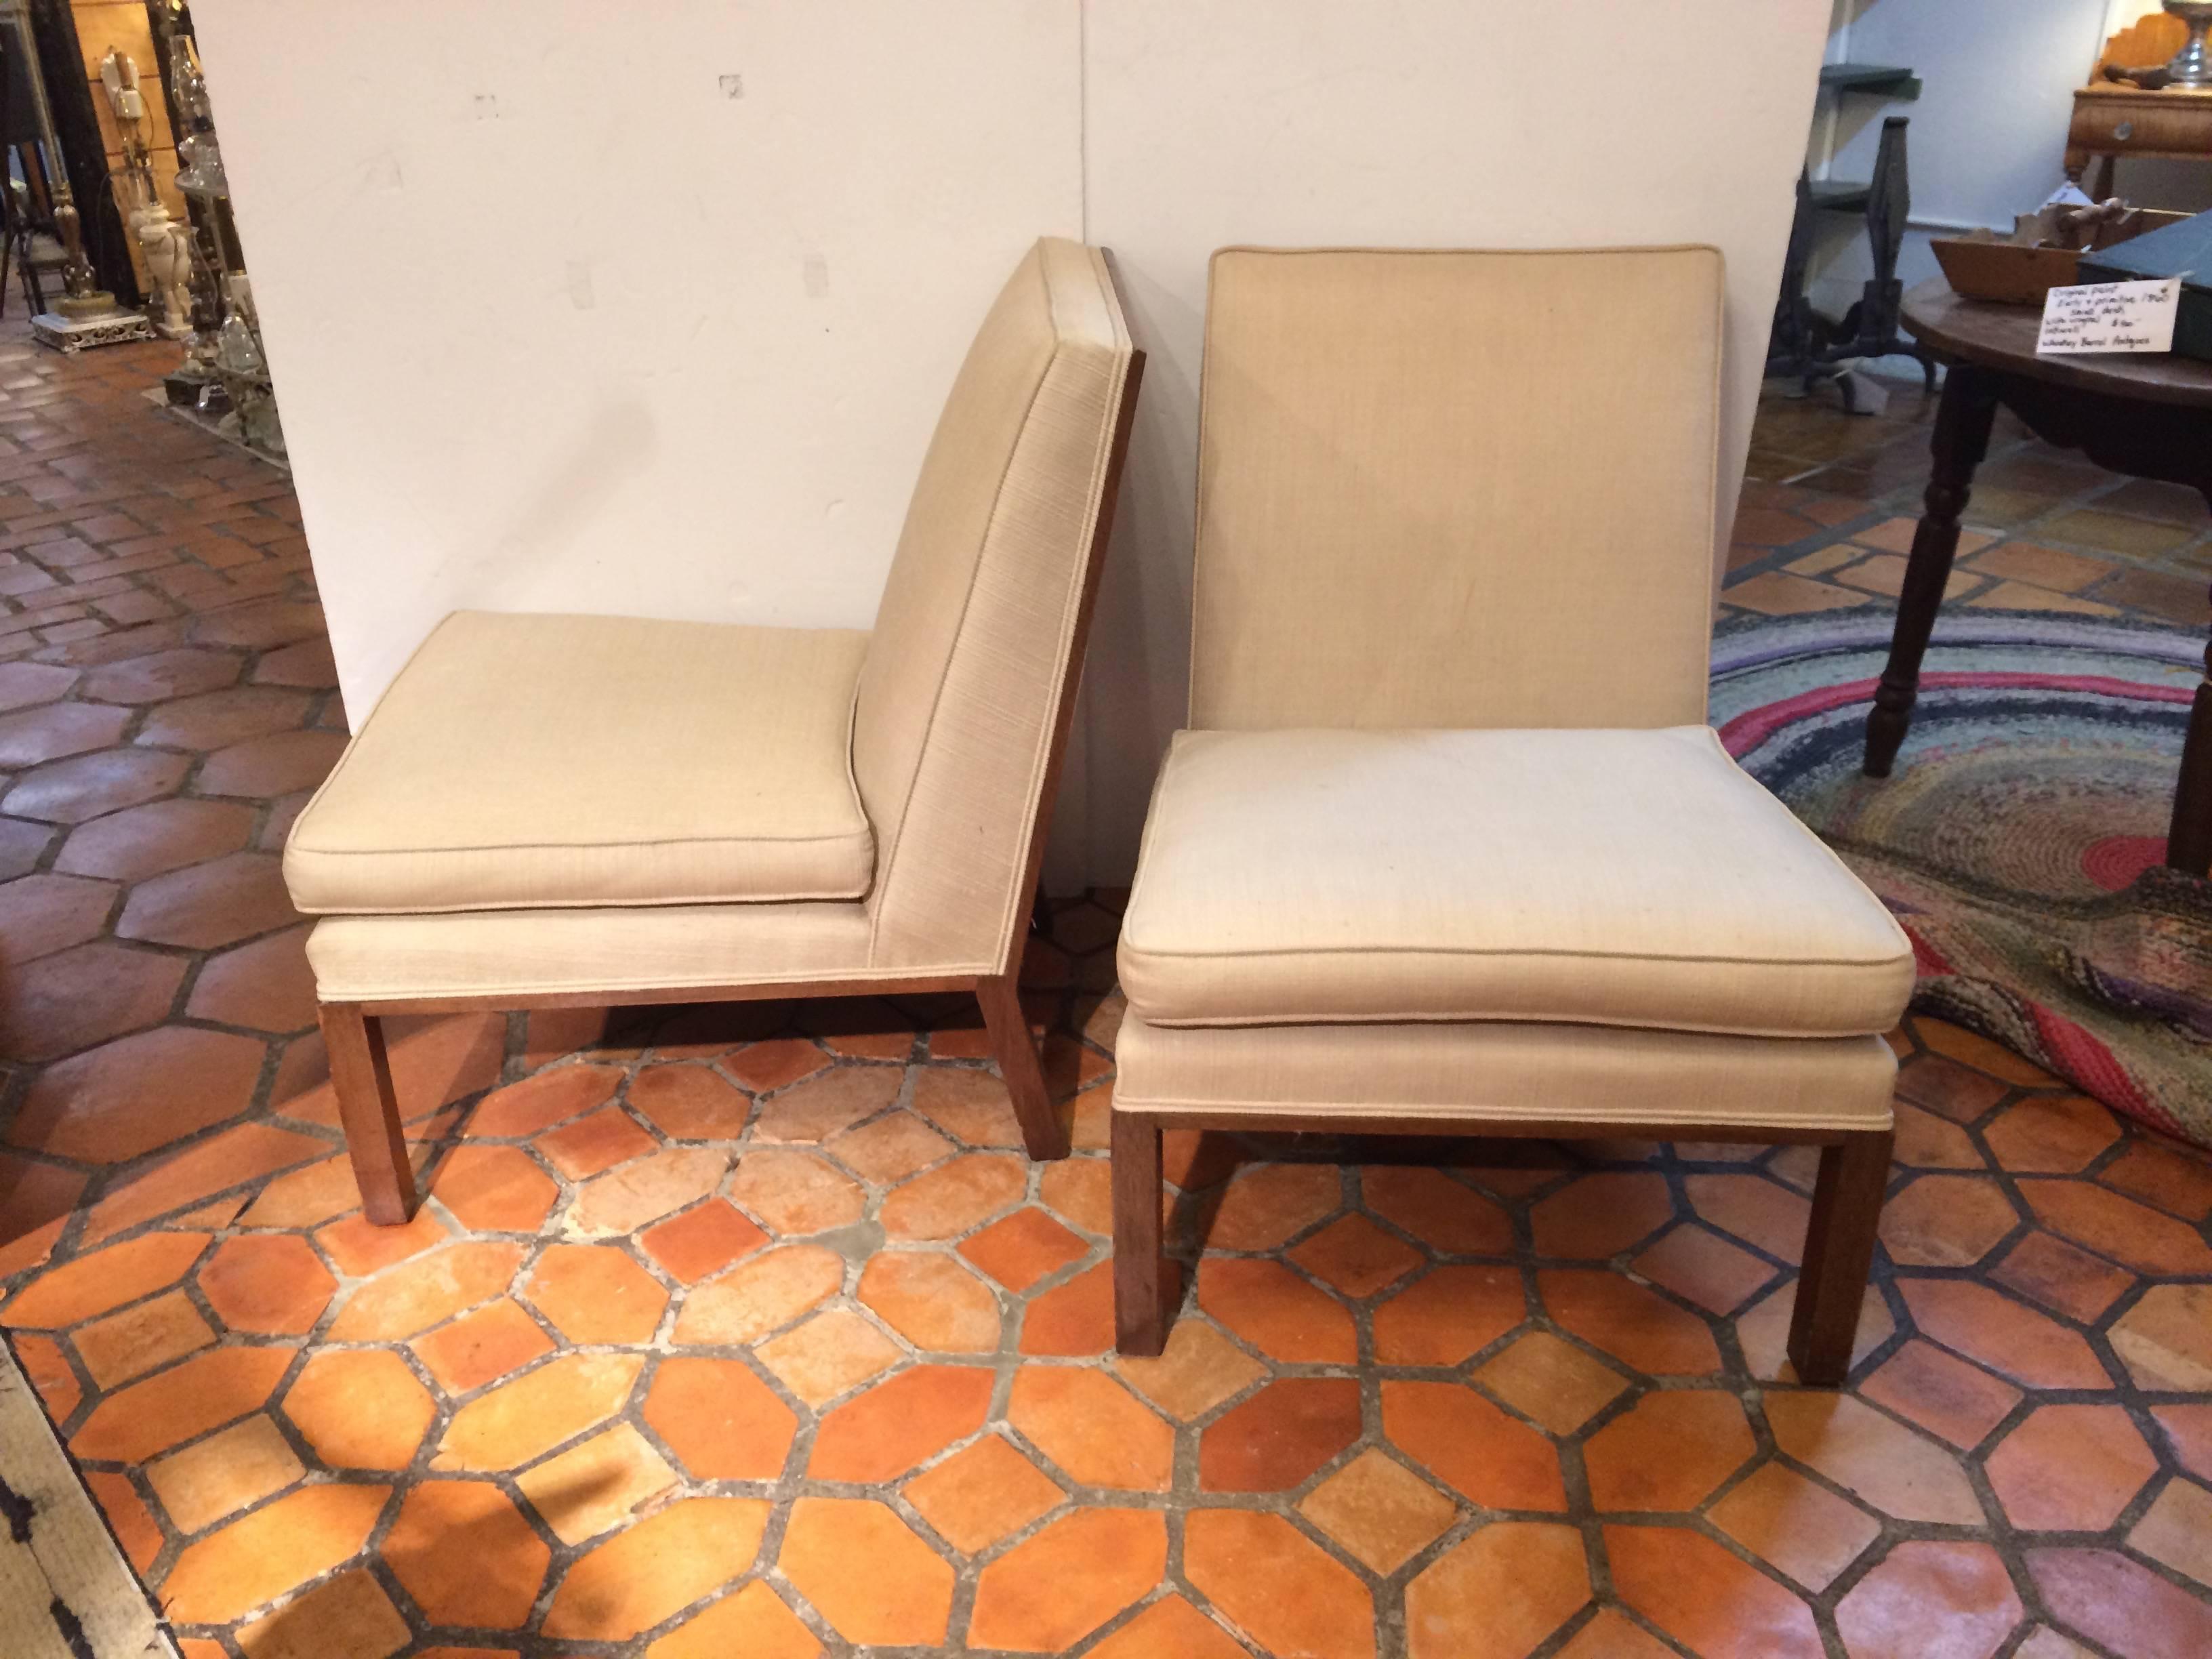 Two classically designed slipper chairs by Edward Wormley having mahogany bases and sleek upholstered Silhouette. The seat cushions are removable.